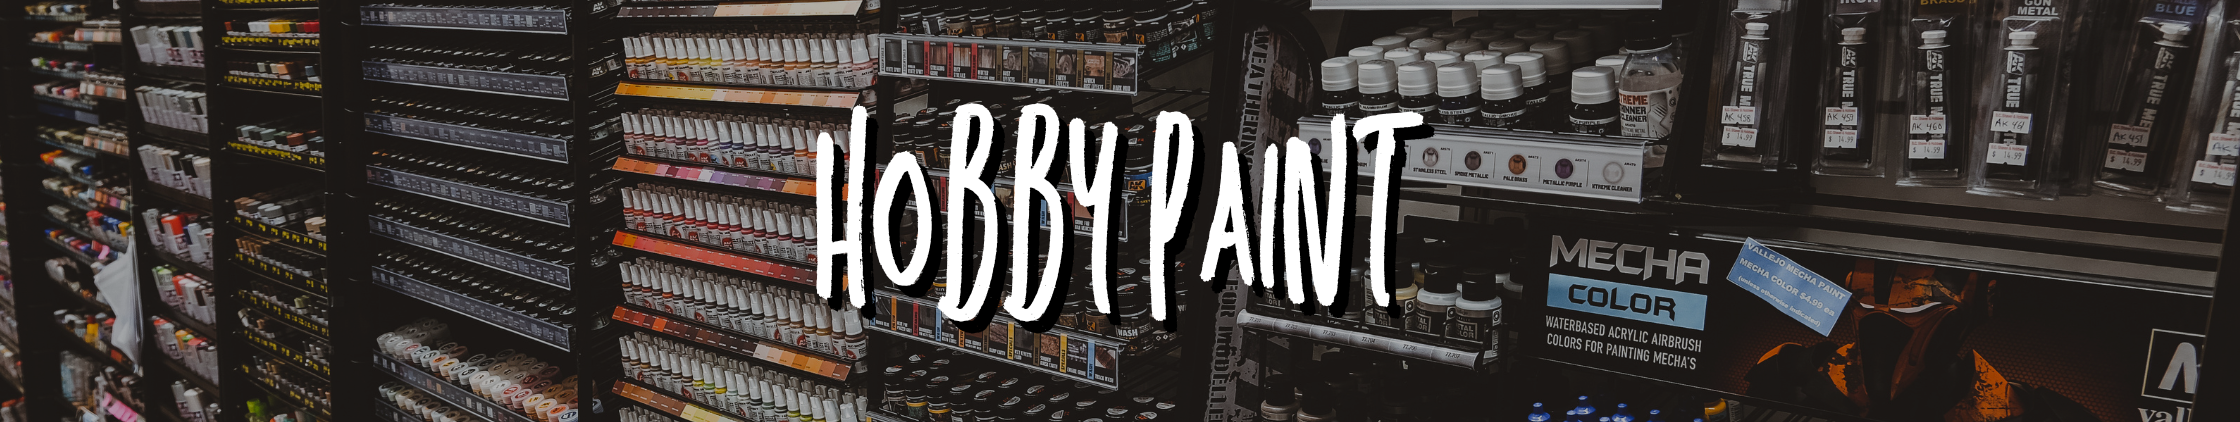 Your one-stop hobby shop for model kit paint based out of Victoria BC. We ship Canada-Wide and carry all the top hobby brands like Tamiya, Mr. Hobby, Vallejo and much more!